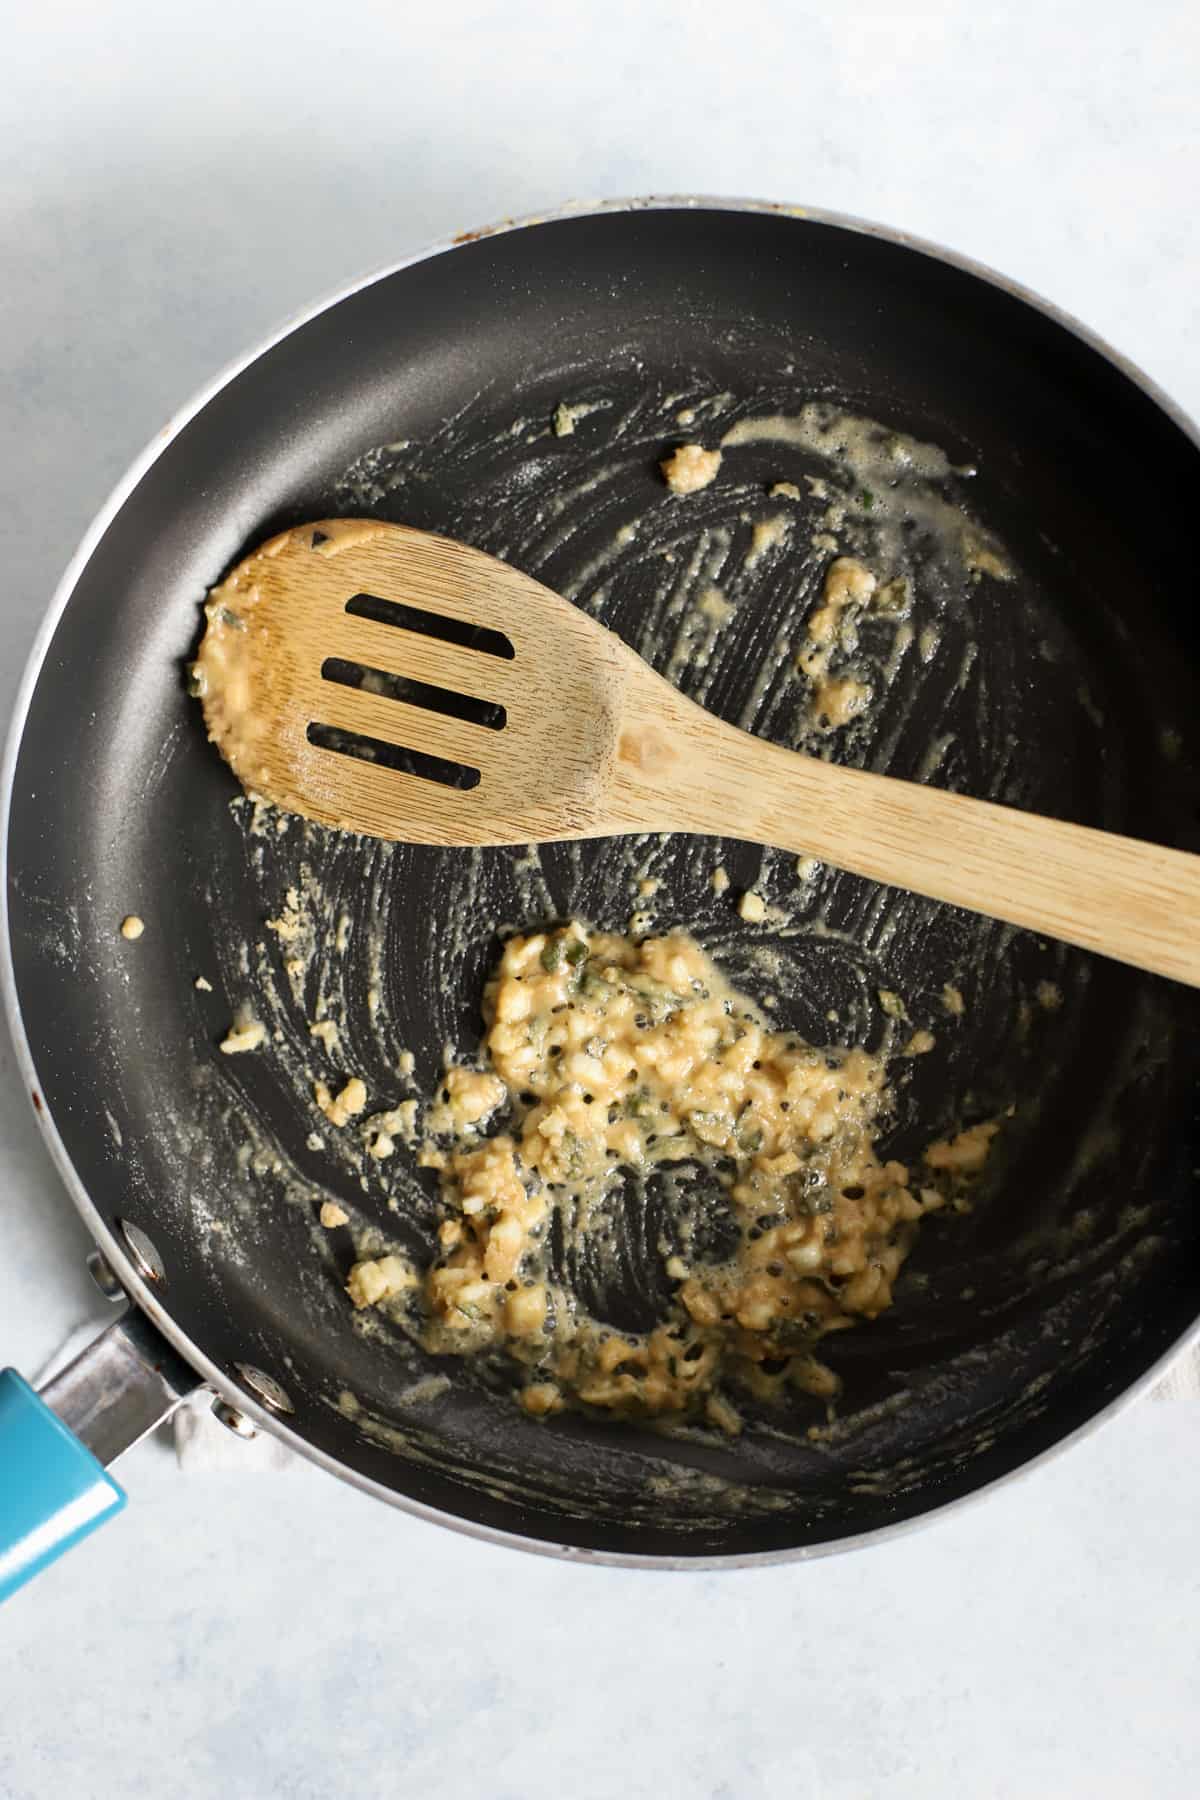 Roux with butter, garlic, sage, and flour in skillet with wooden spoon, on light blue and white surface